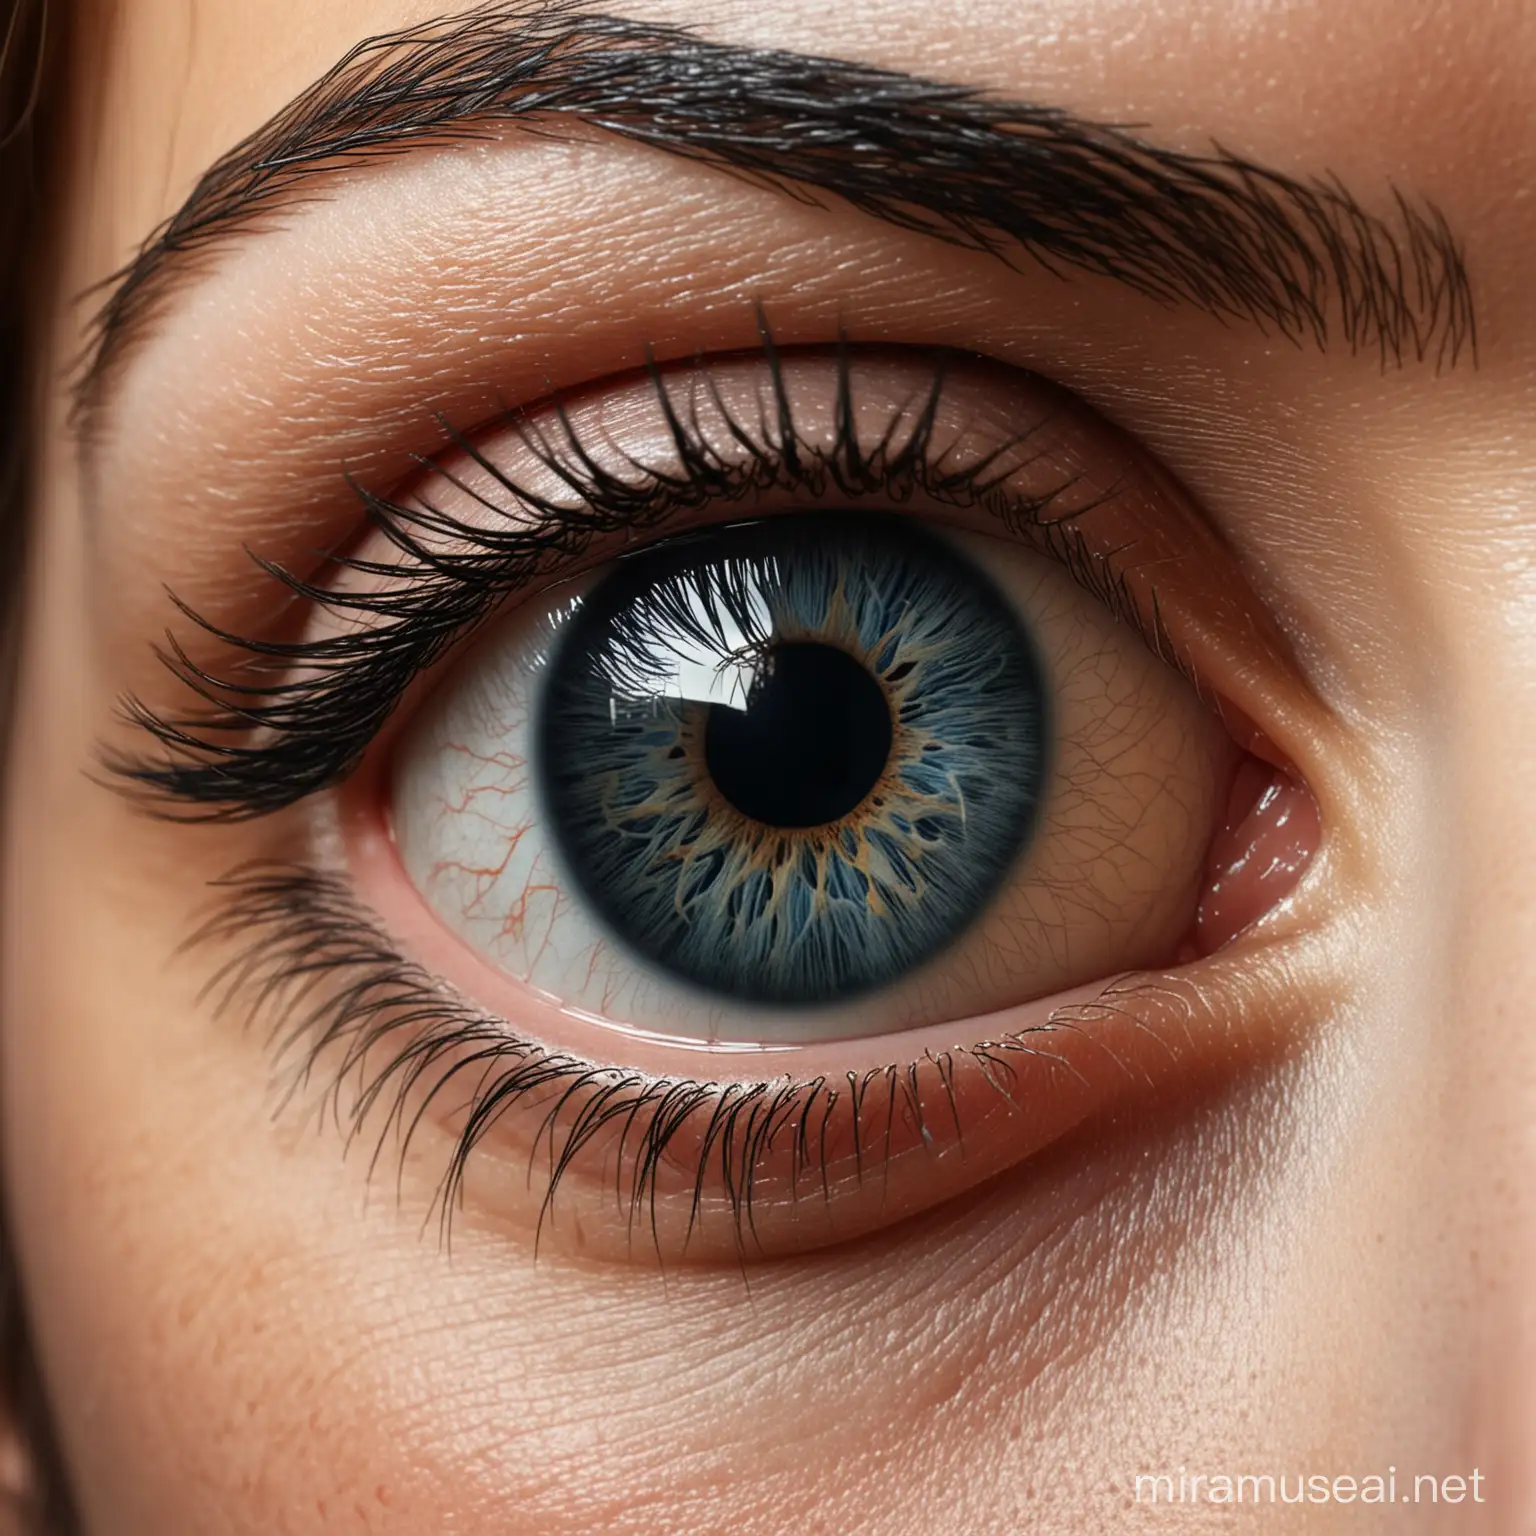 Realistic Eye Tattoo Design with Detailed Light and Shadow